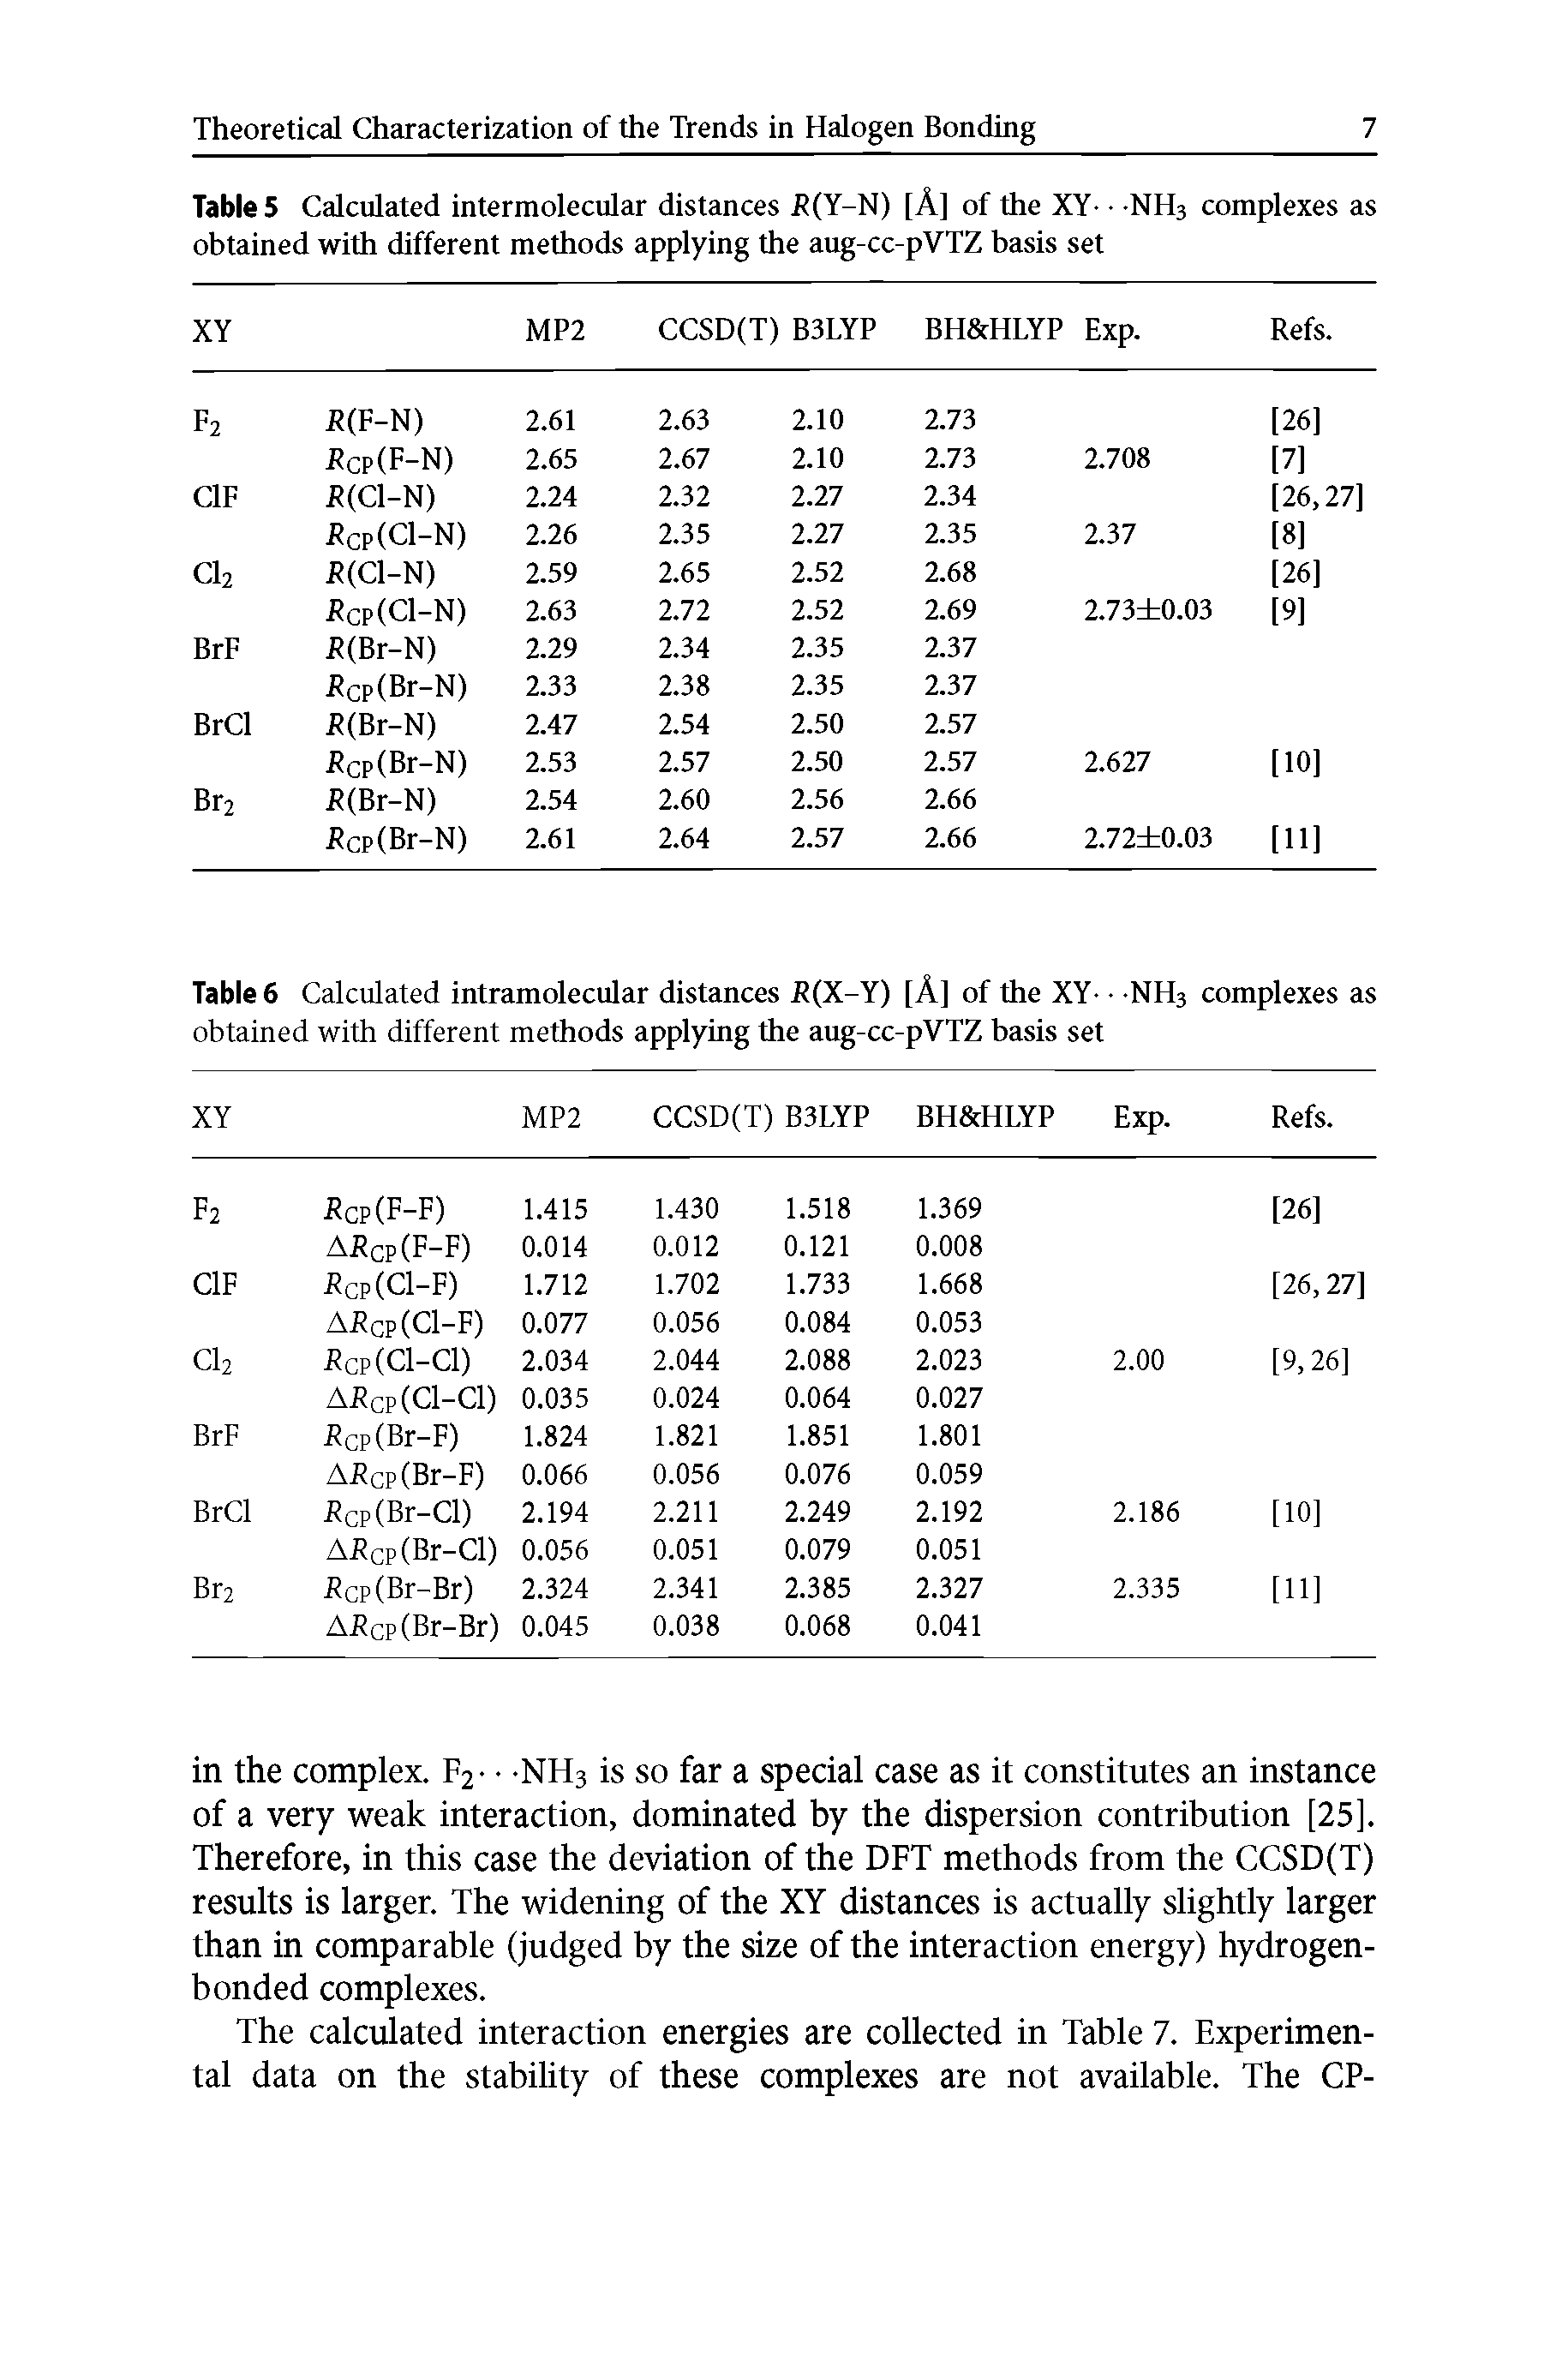 Table 6 Calculated intramolecular distances R(X-Y) [A] of the XY- NH3 complexes as obtained with different methods applying the aug-cc-pVTZ basis set ...